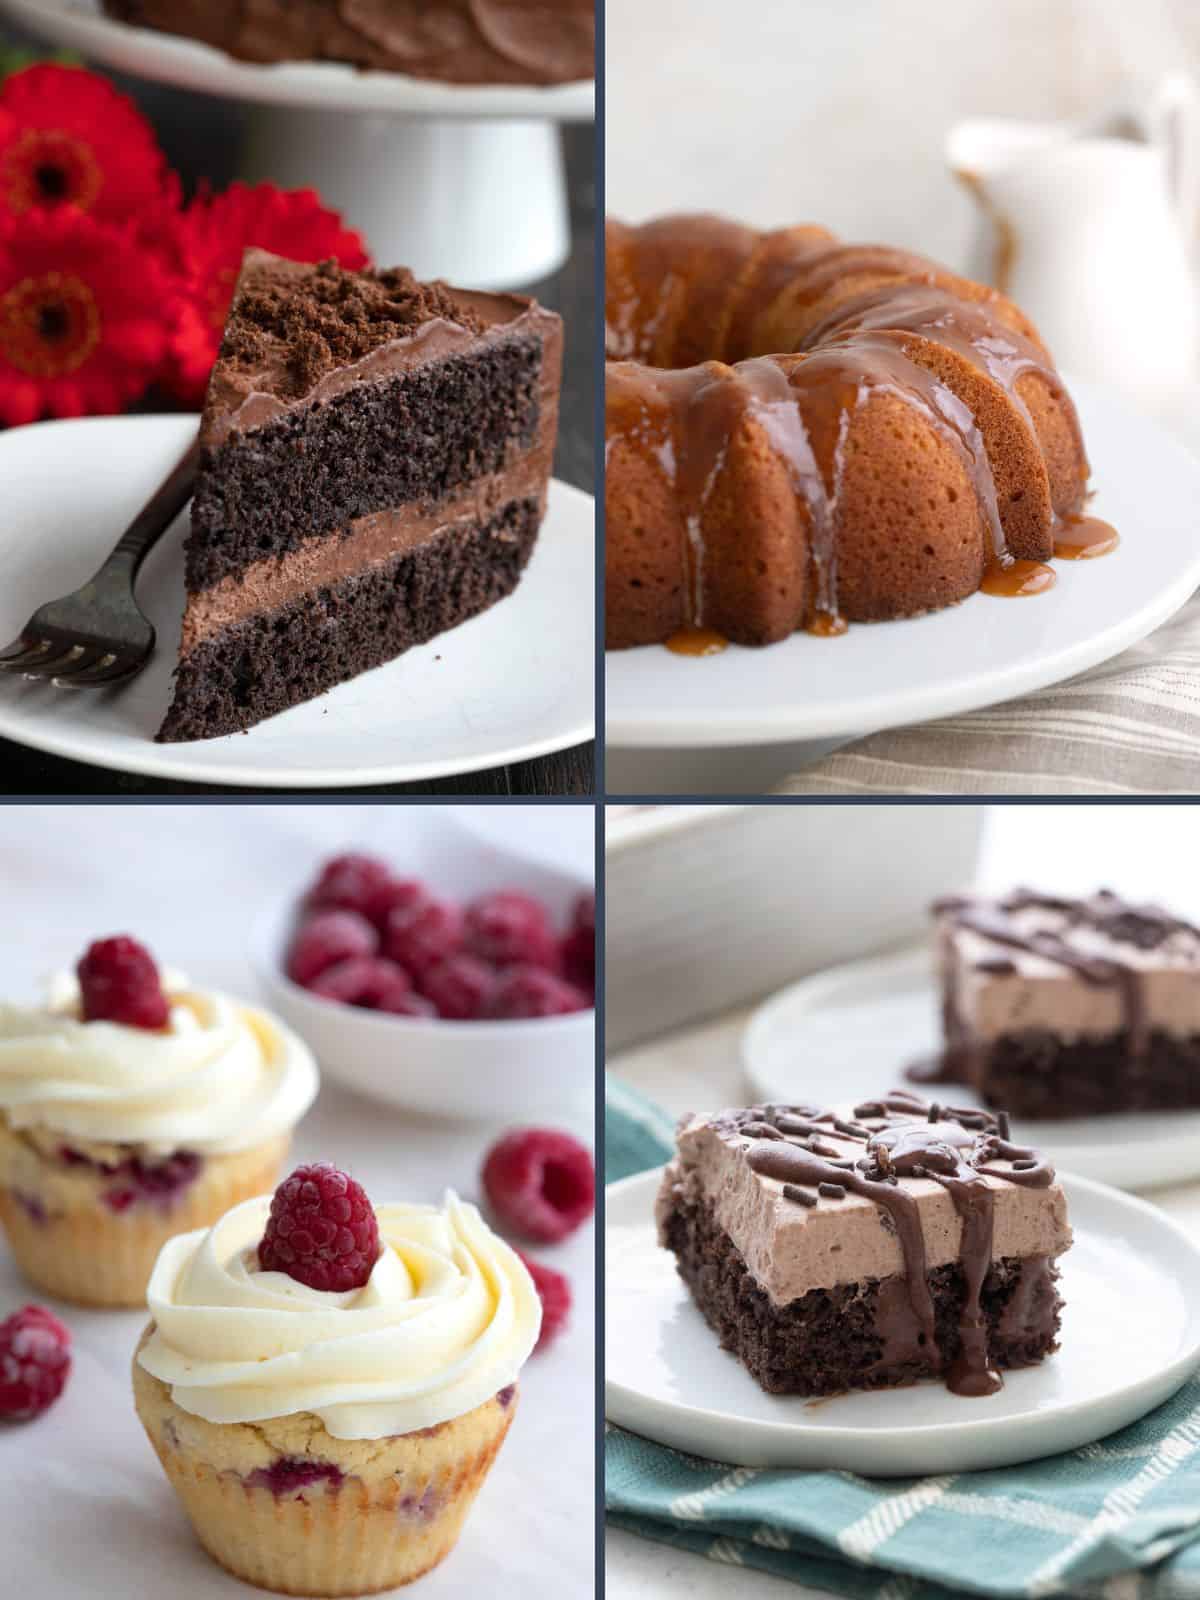 A collage of four images showing the keto cakes from The Ultimate Guide to Keto Cakes.